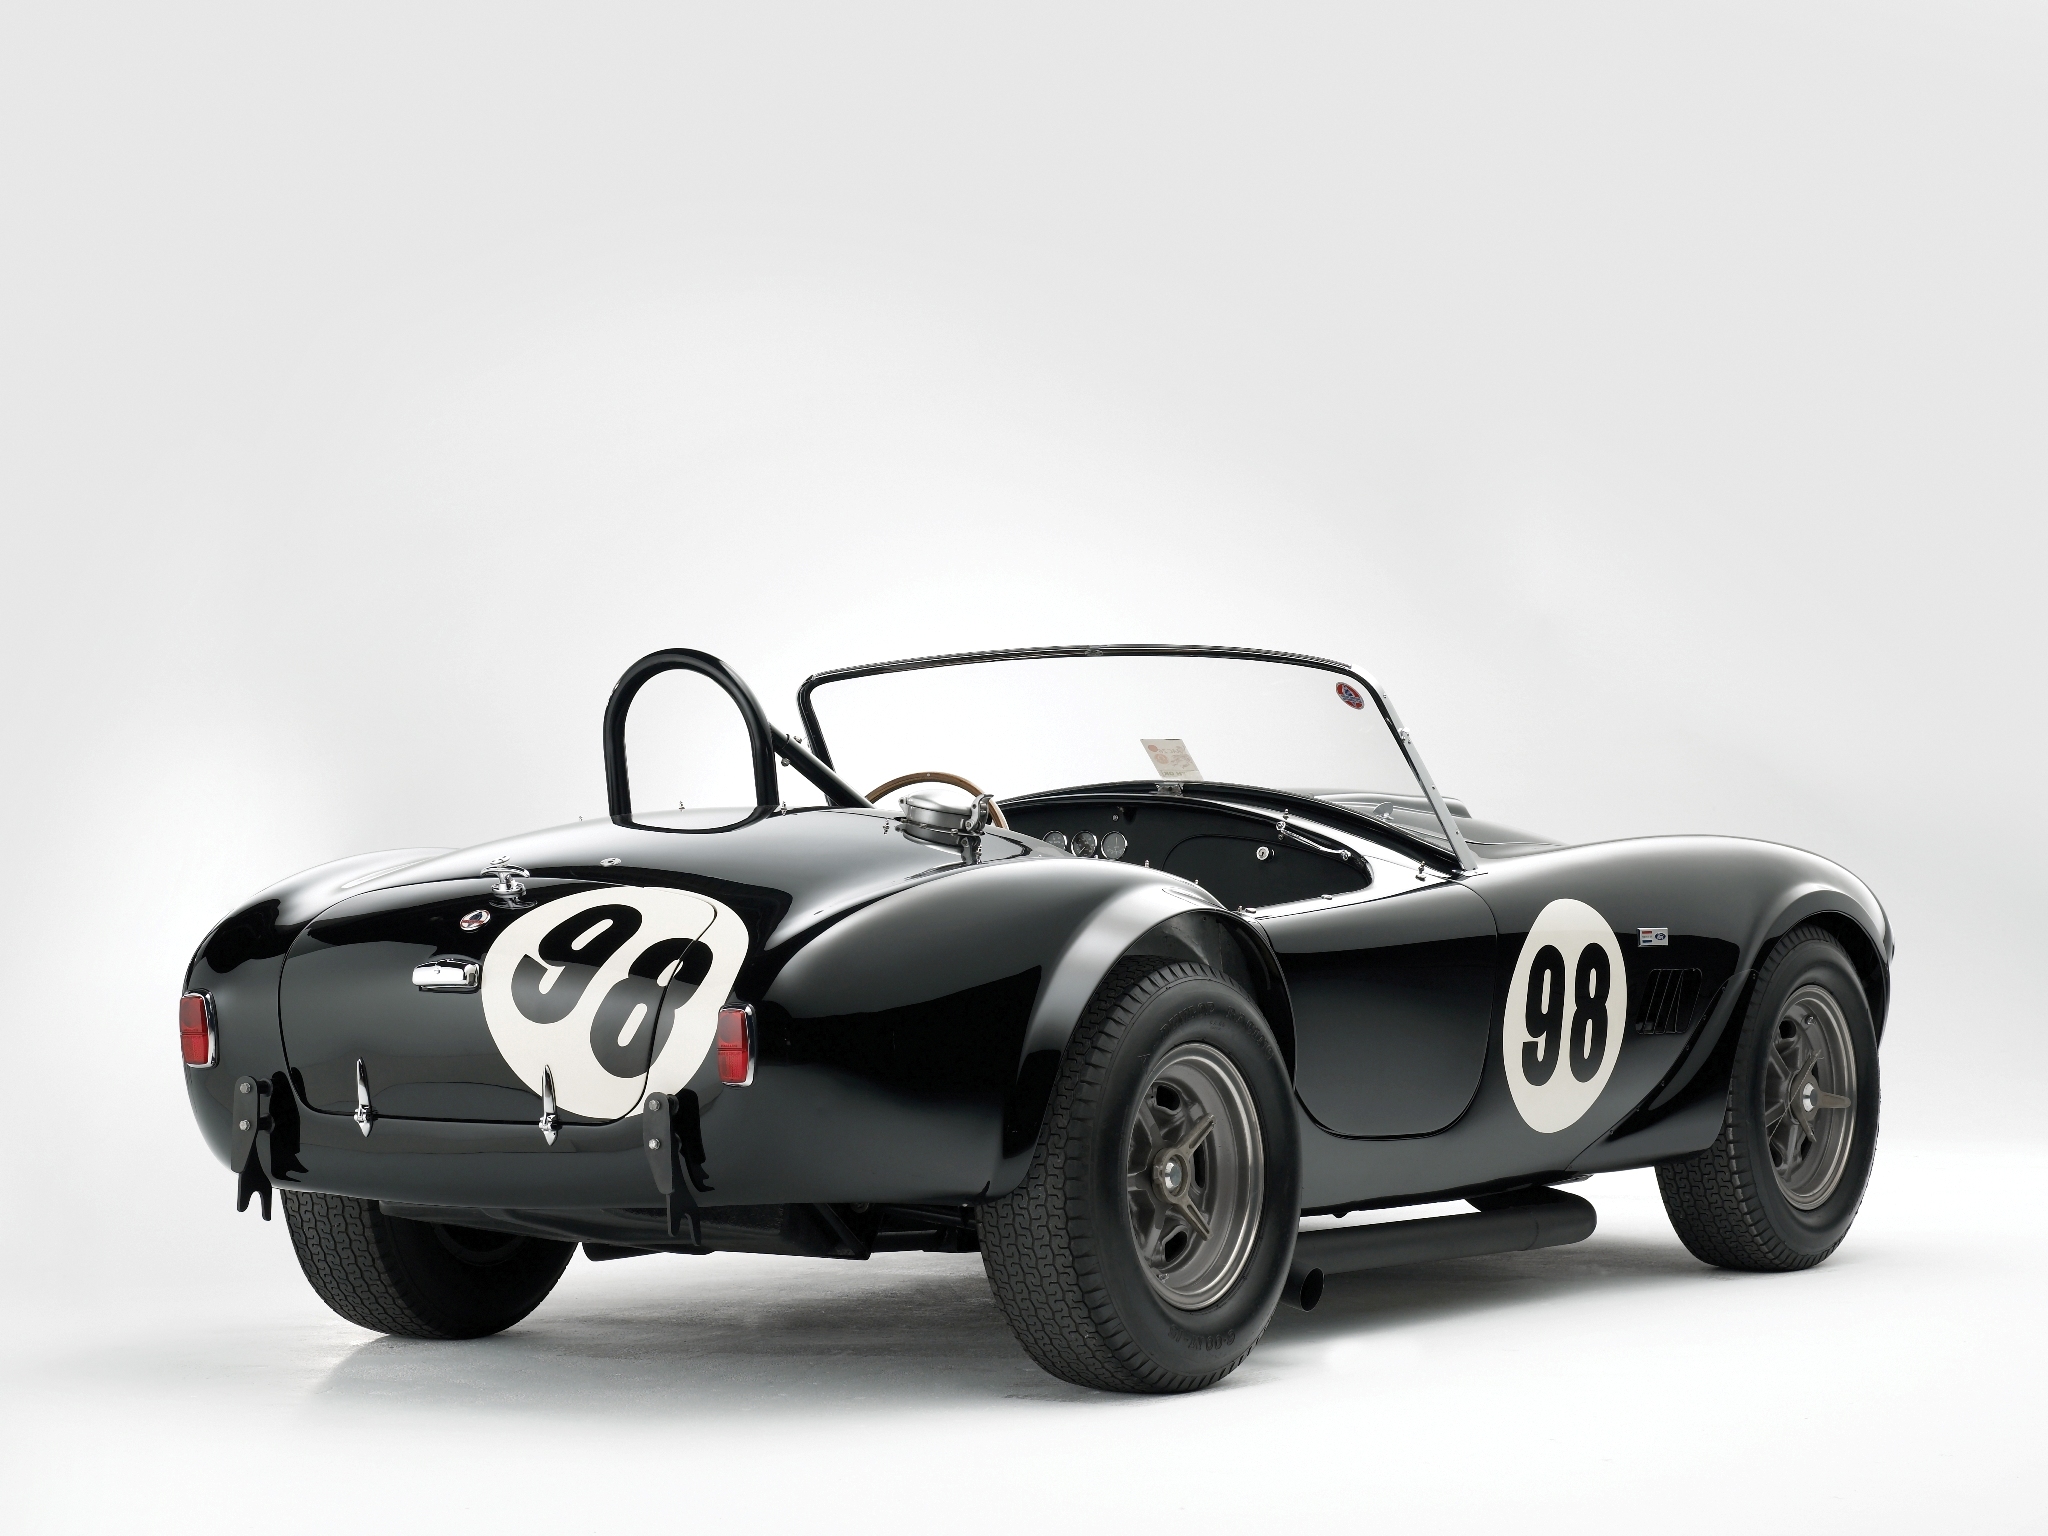 Shelby Cobra 289 Roadster Le Mans Racing Car '1963